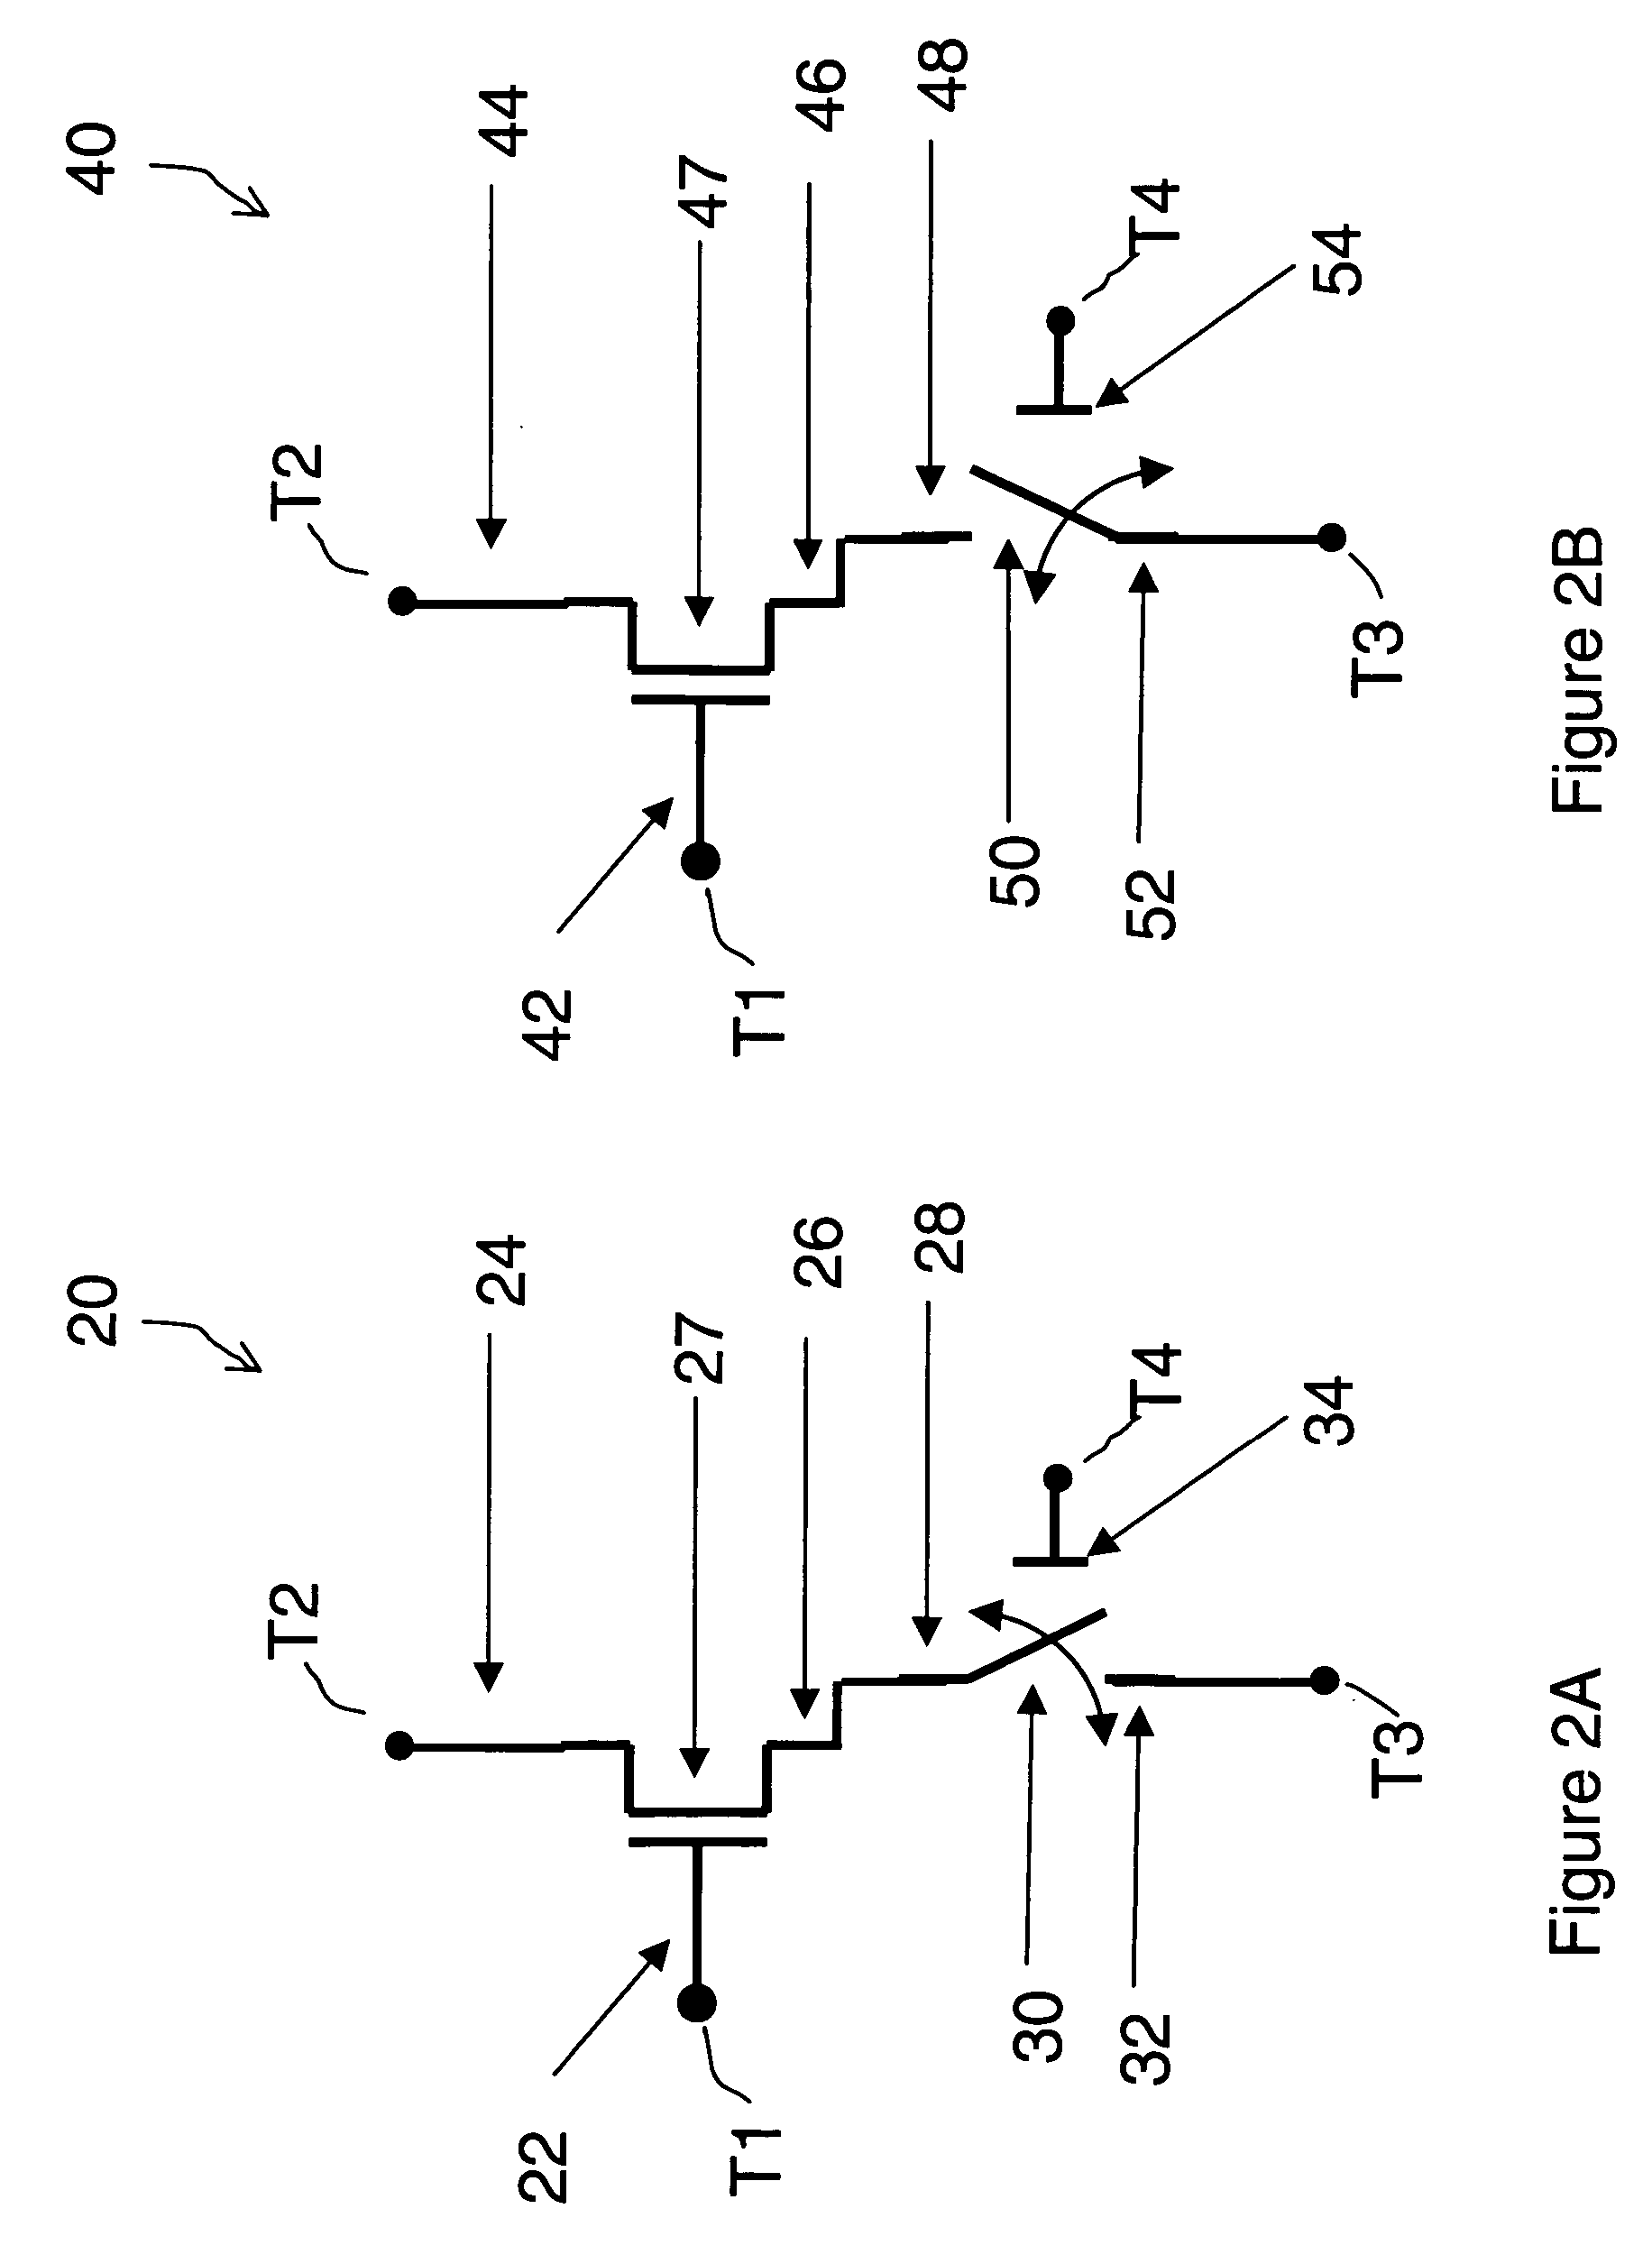 Circuit arrays having cells with combinations of transistors and nanotube switching elements